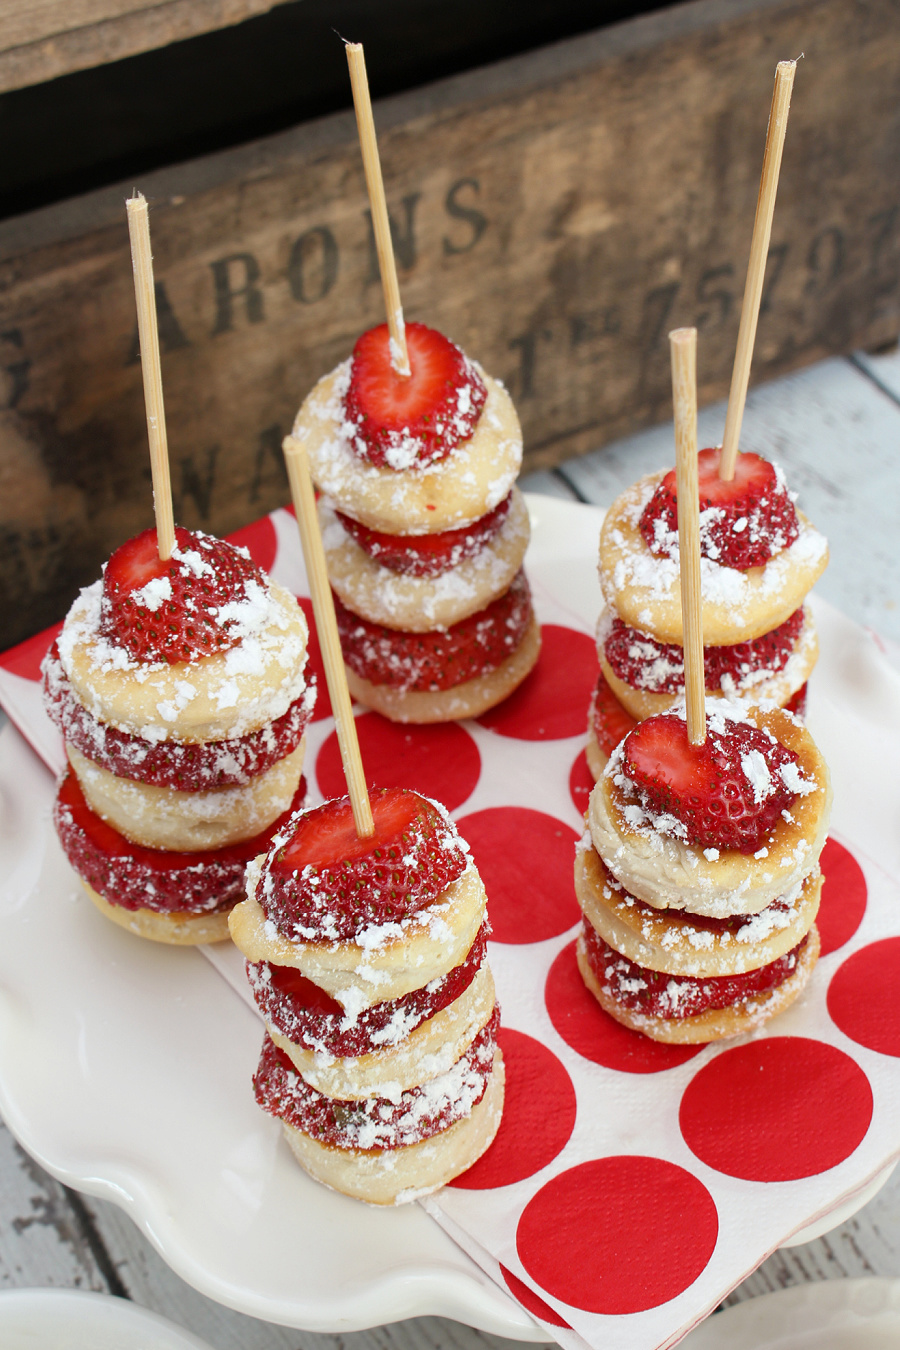 Strawberry shortcake kabobs topped with icing sugar.